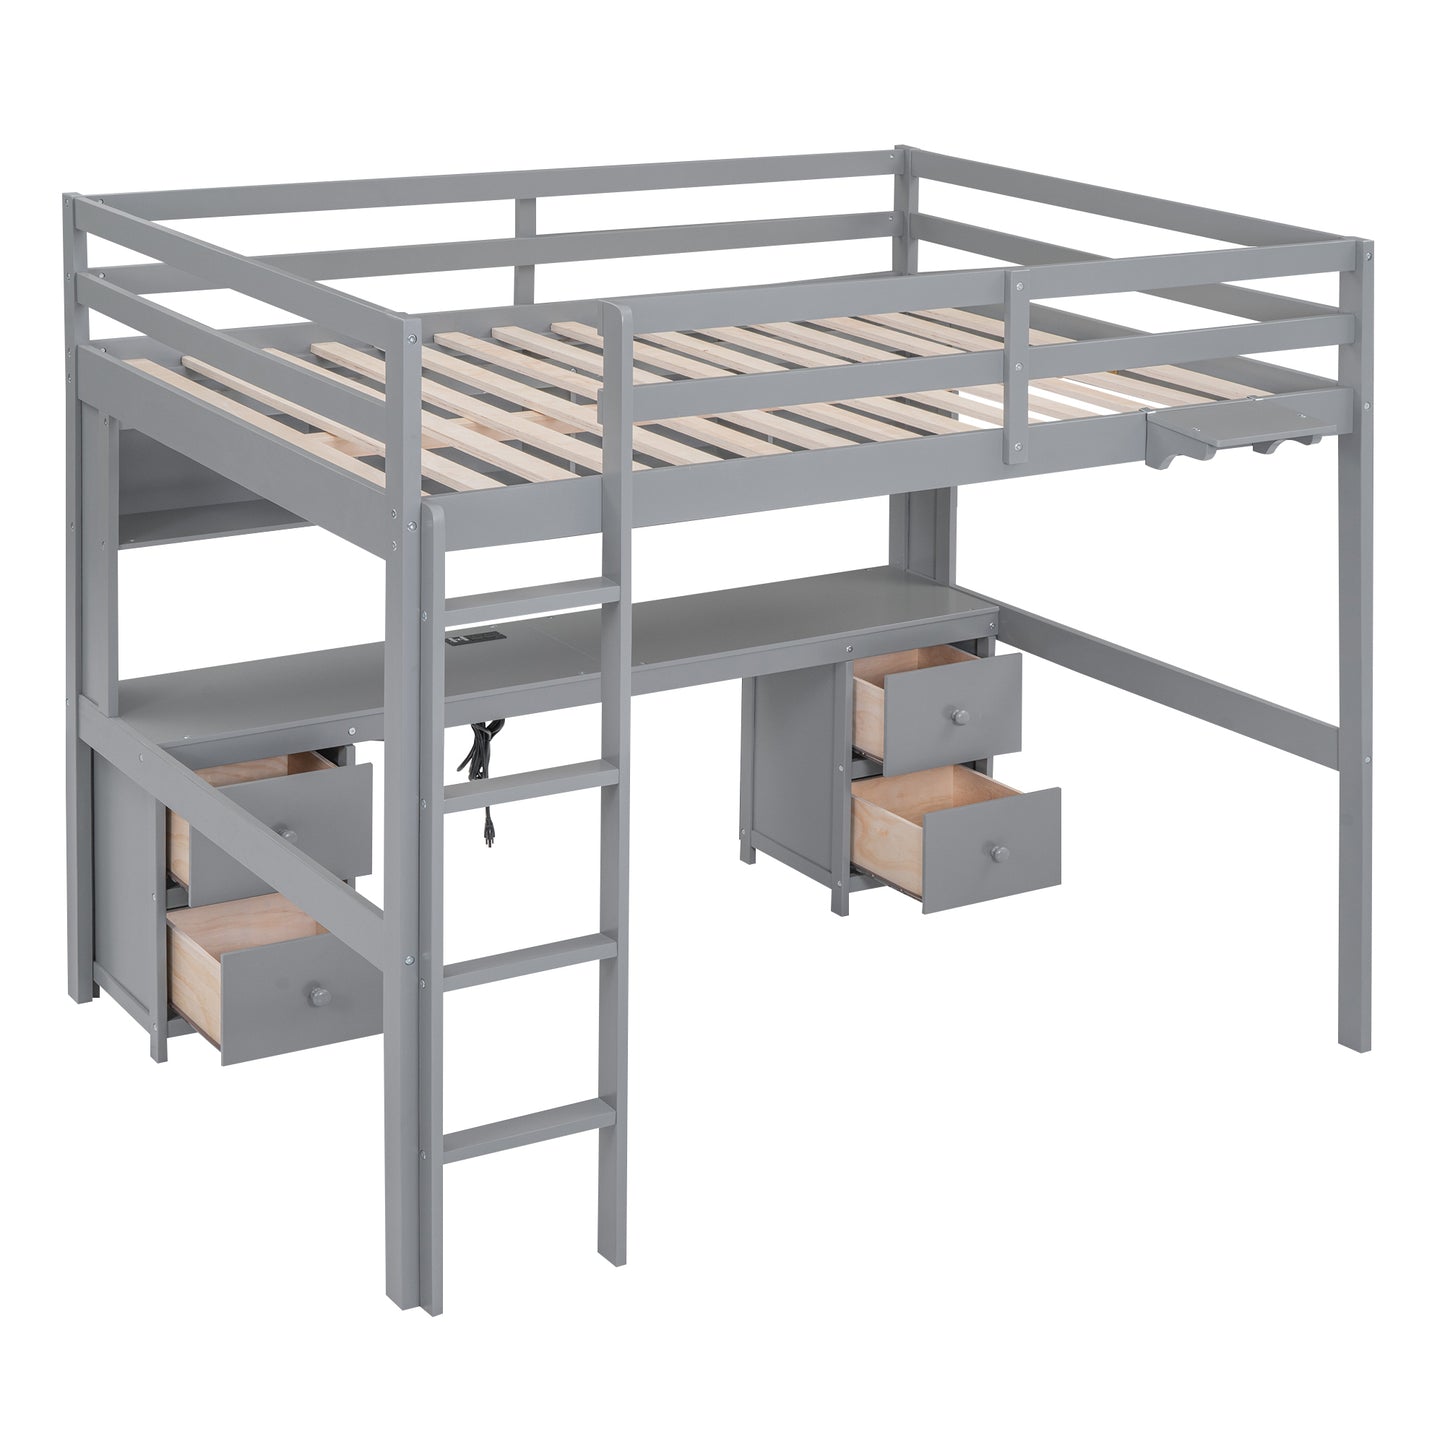 Full Size Loft Bed with Desk, Cabinets, Drawers and Bedside Tray, Charging Station, Gray